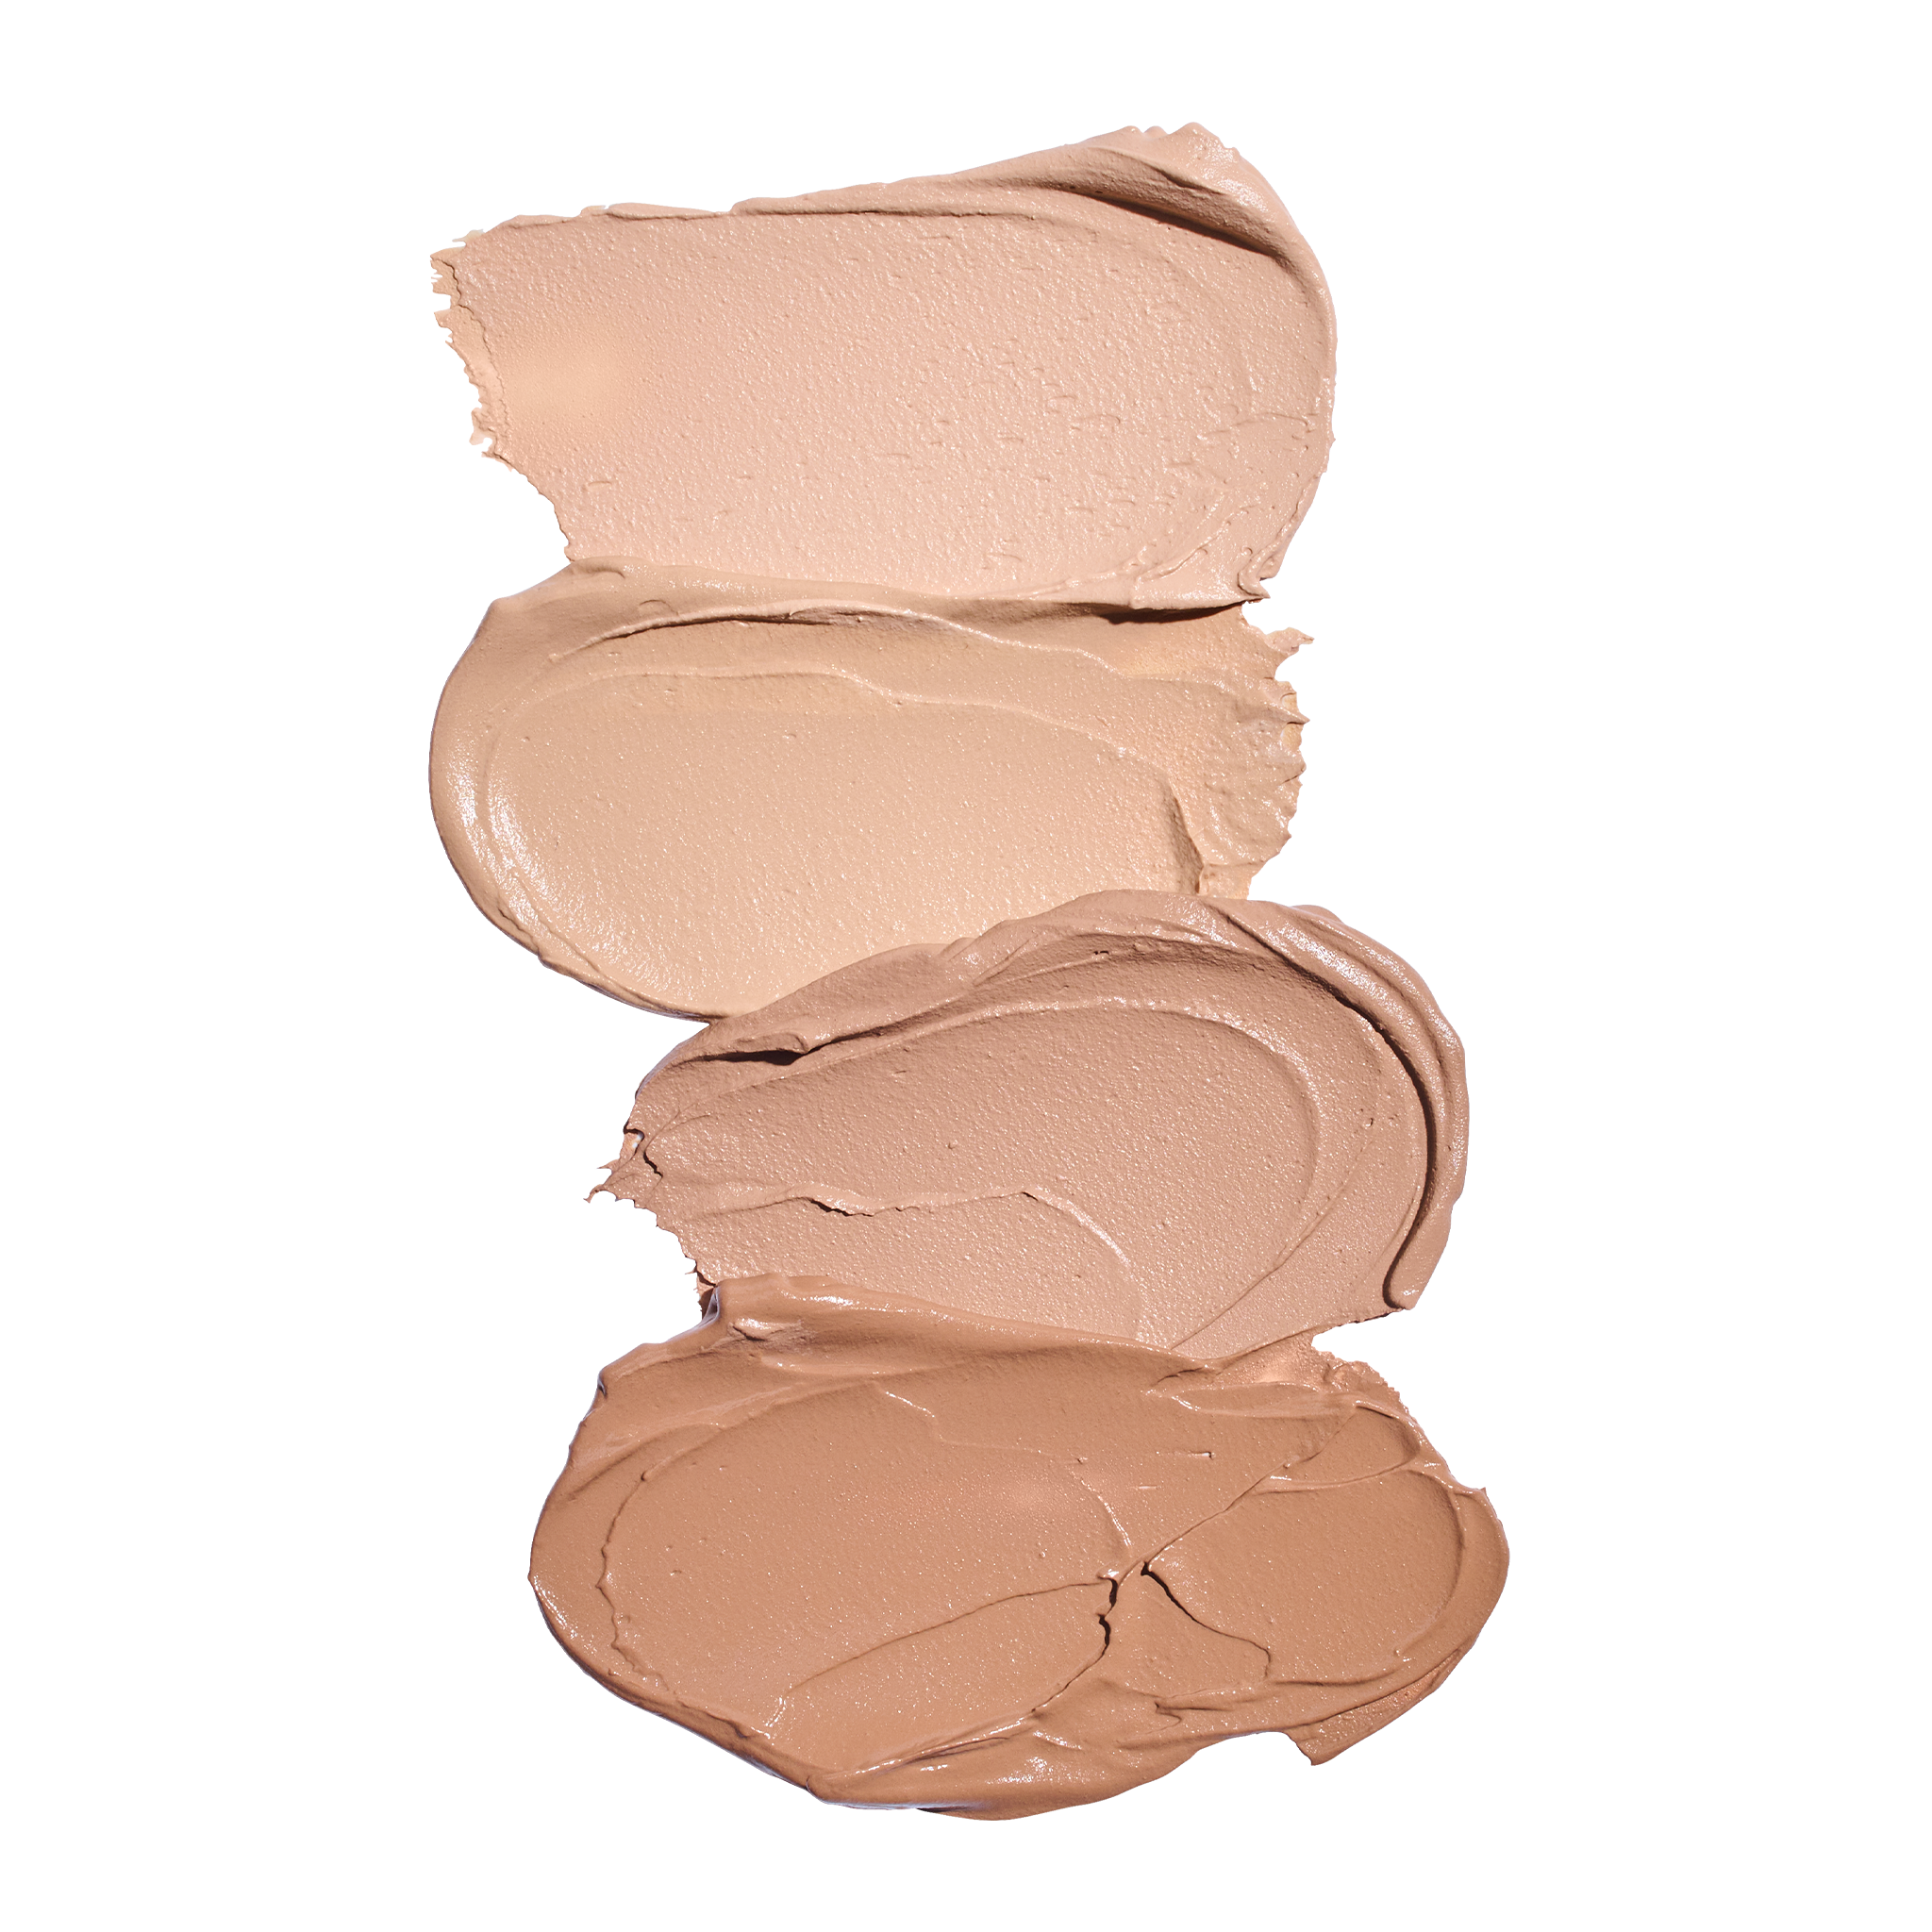 Tint du Soleil™ Whipped Mineral Foundation SPF 30 shade swatches || all